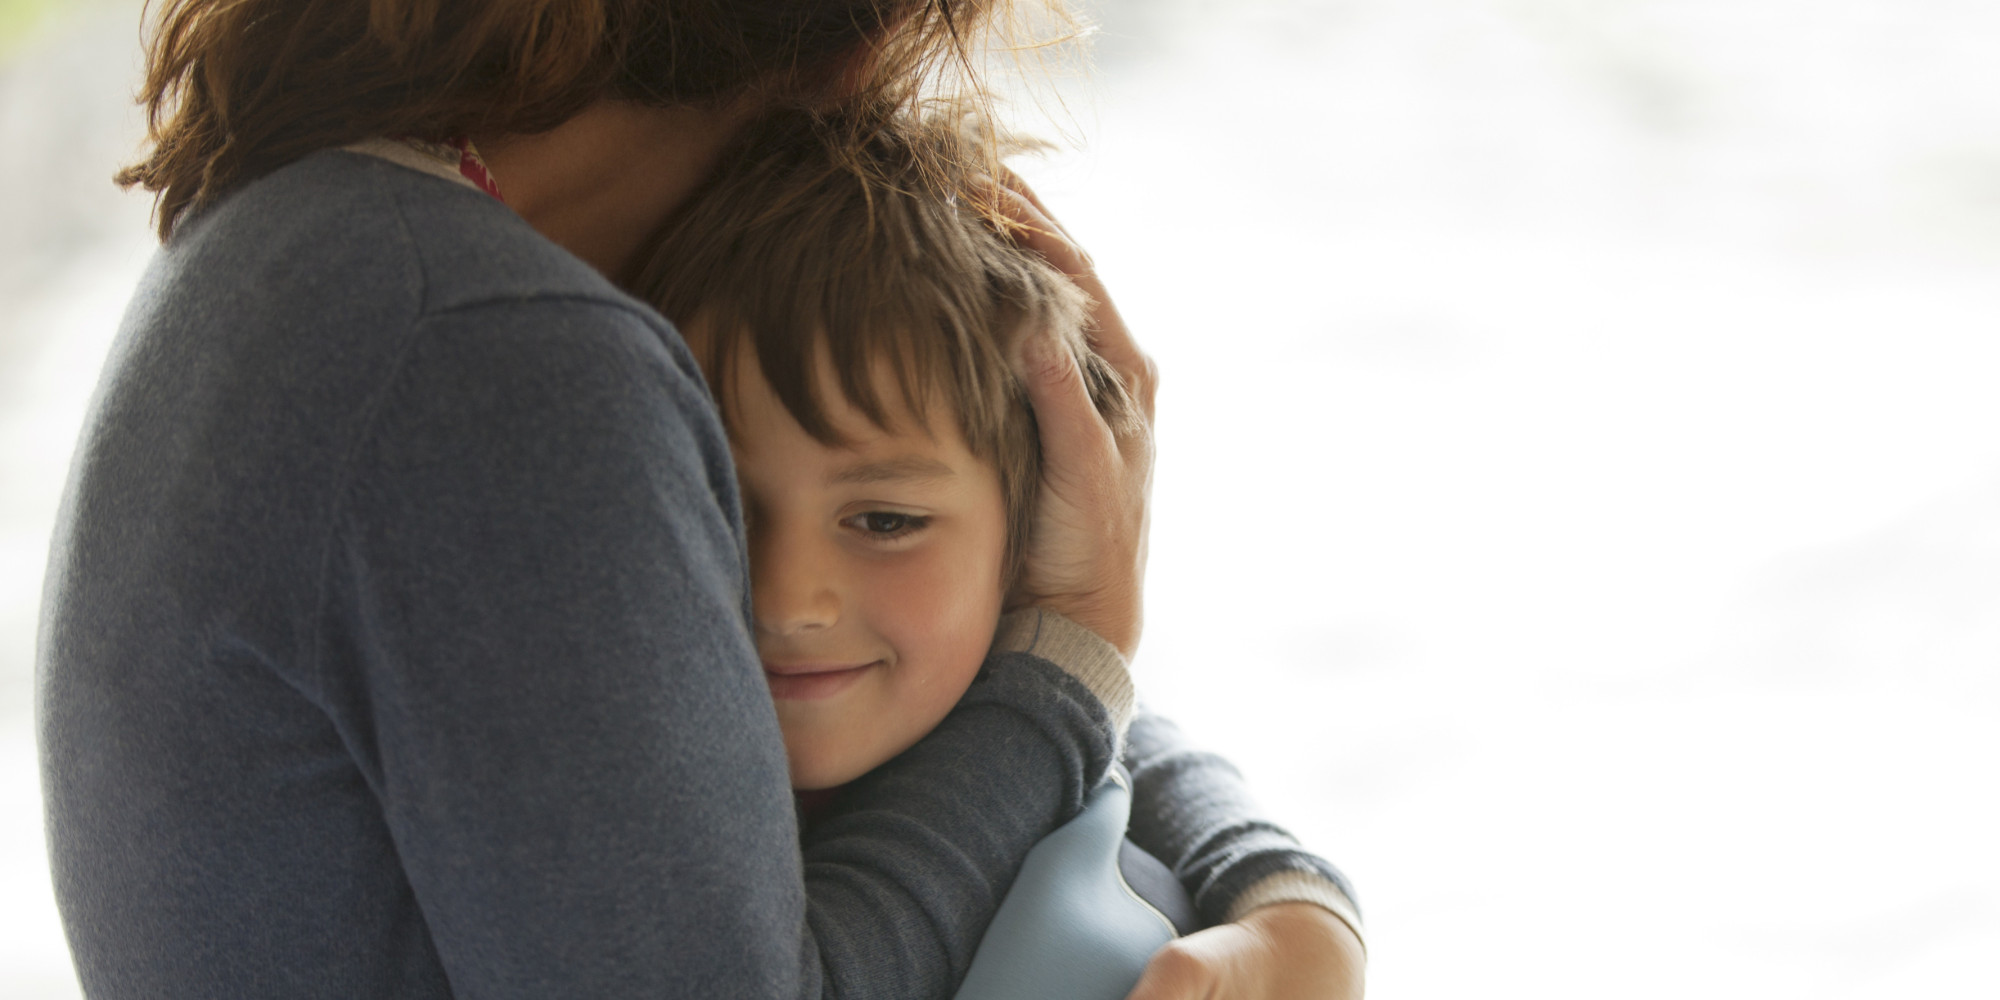 10 Things This Single Mom Wants Her Kids to Know | HuffPost